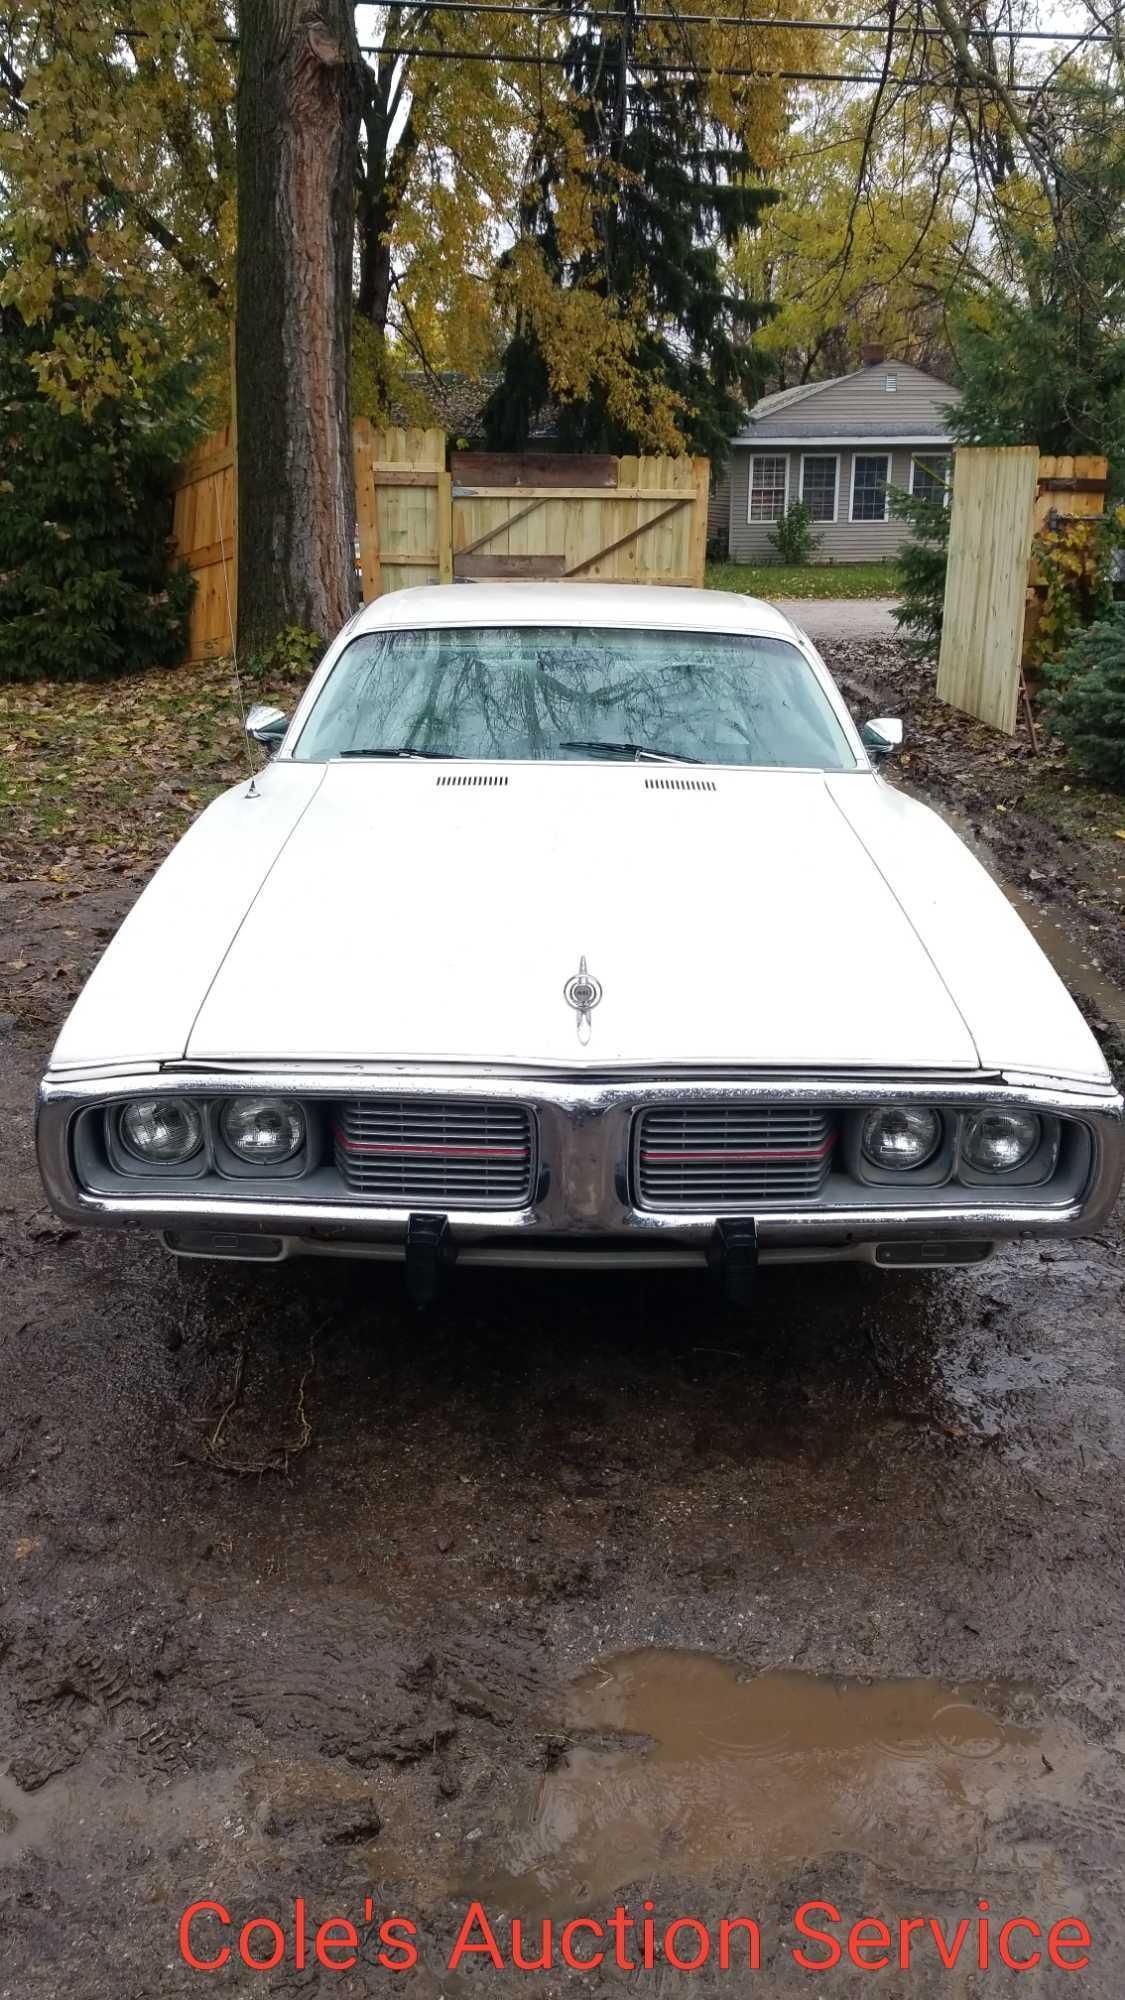 1973 Dodge Charger SE. In beautiful condition, runs and drives great! 318 V8 engine, automatic